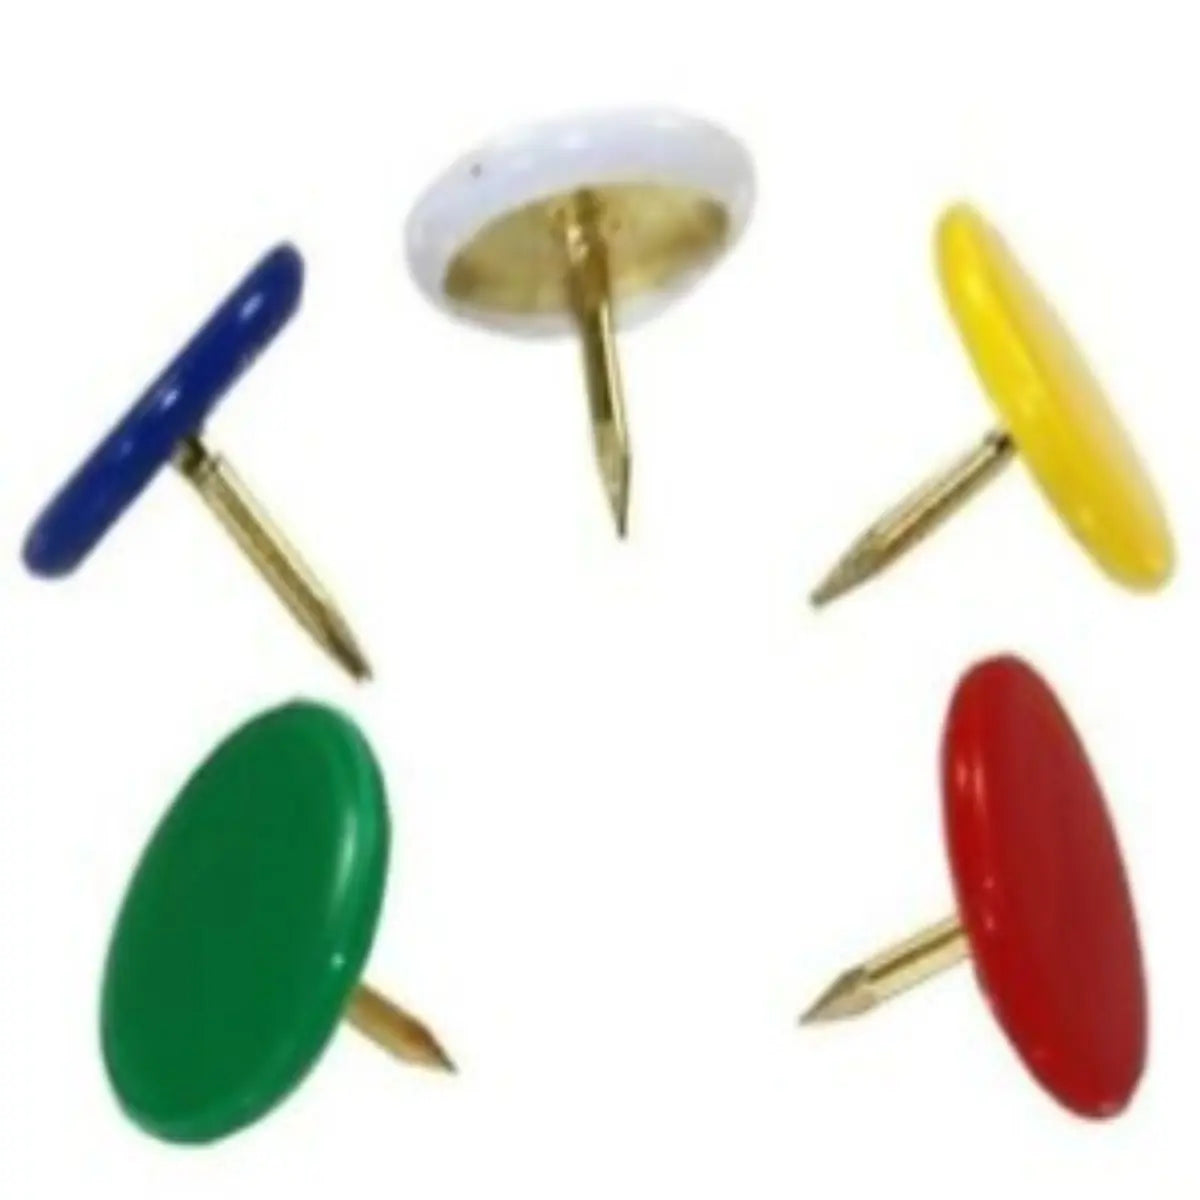 Coloured drawing pins